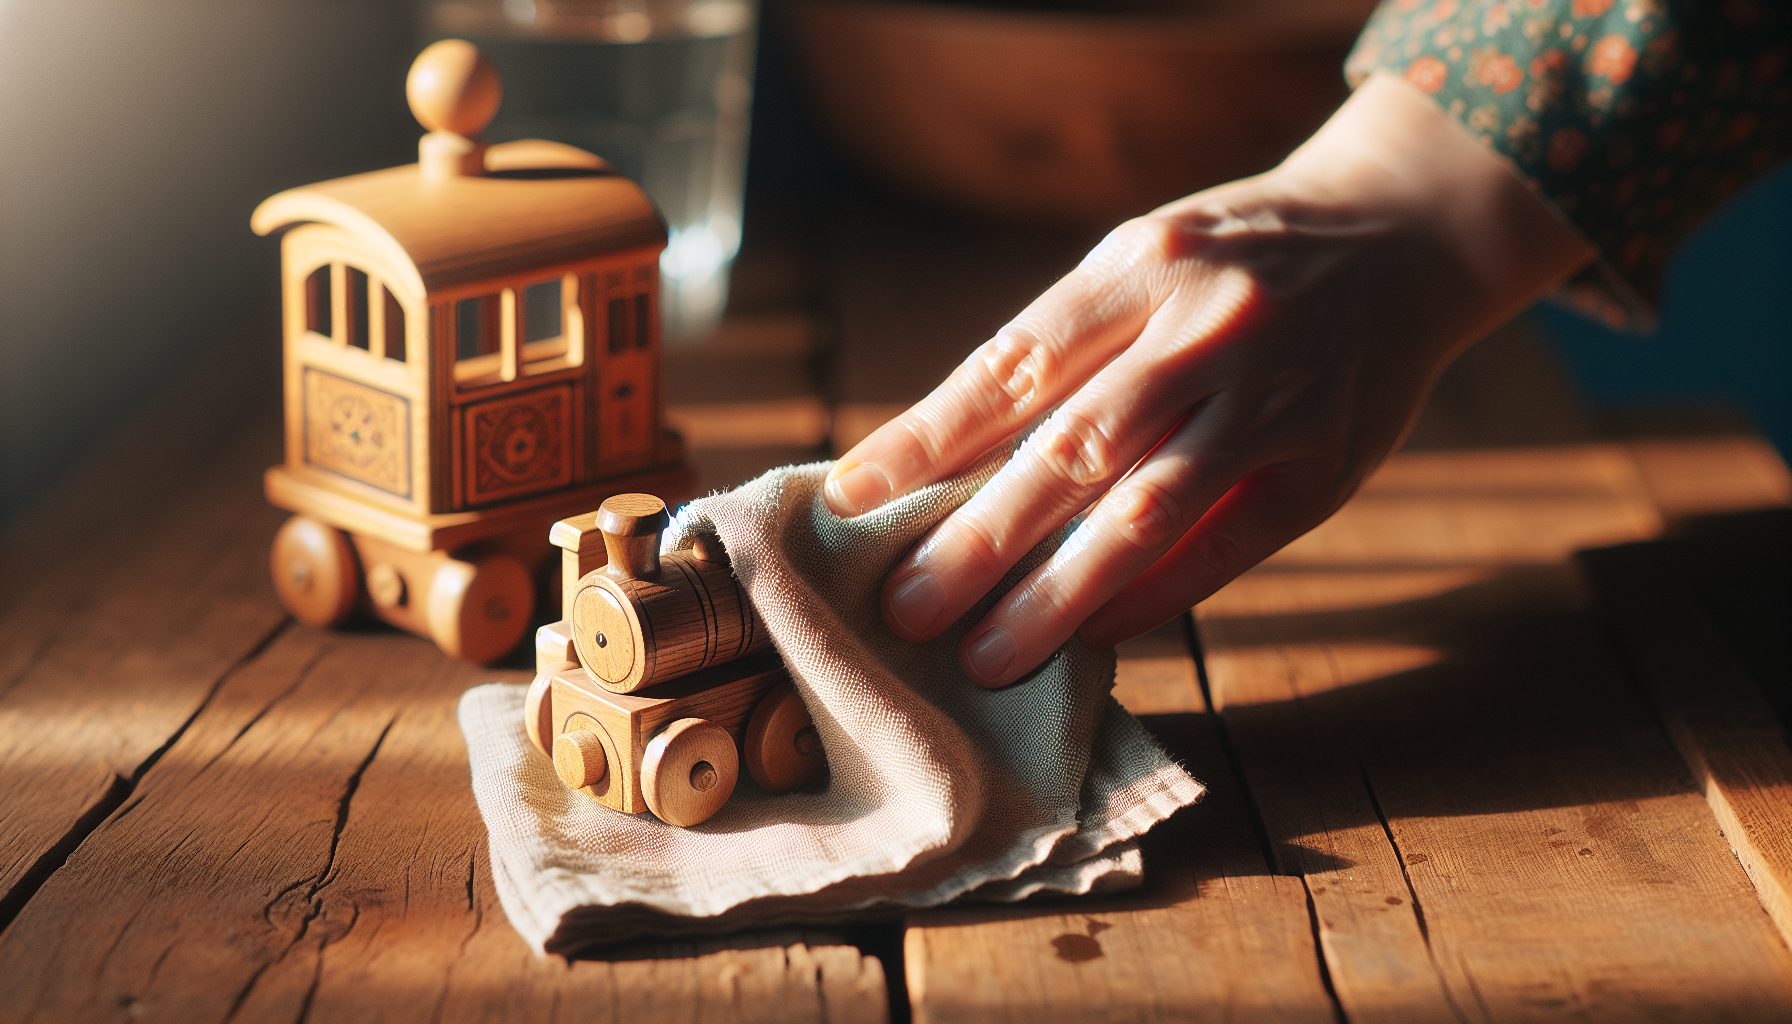 Gentle wiping with a damp cloth for wooden toys